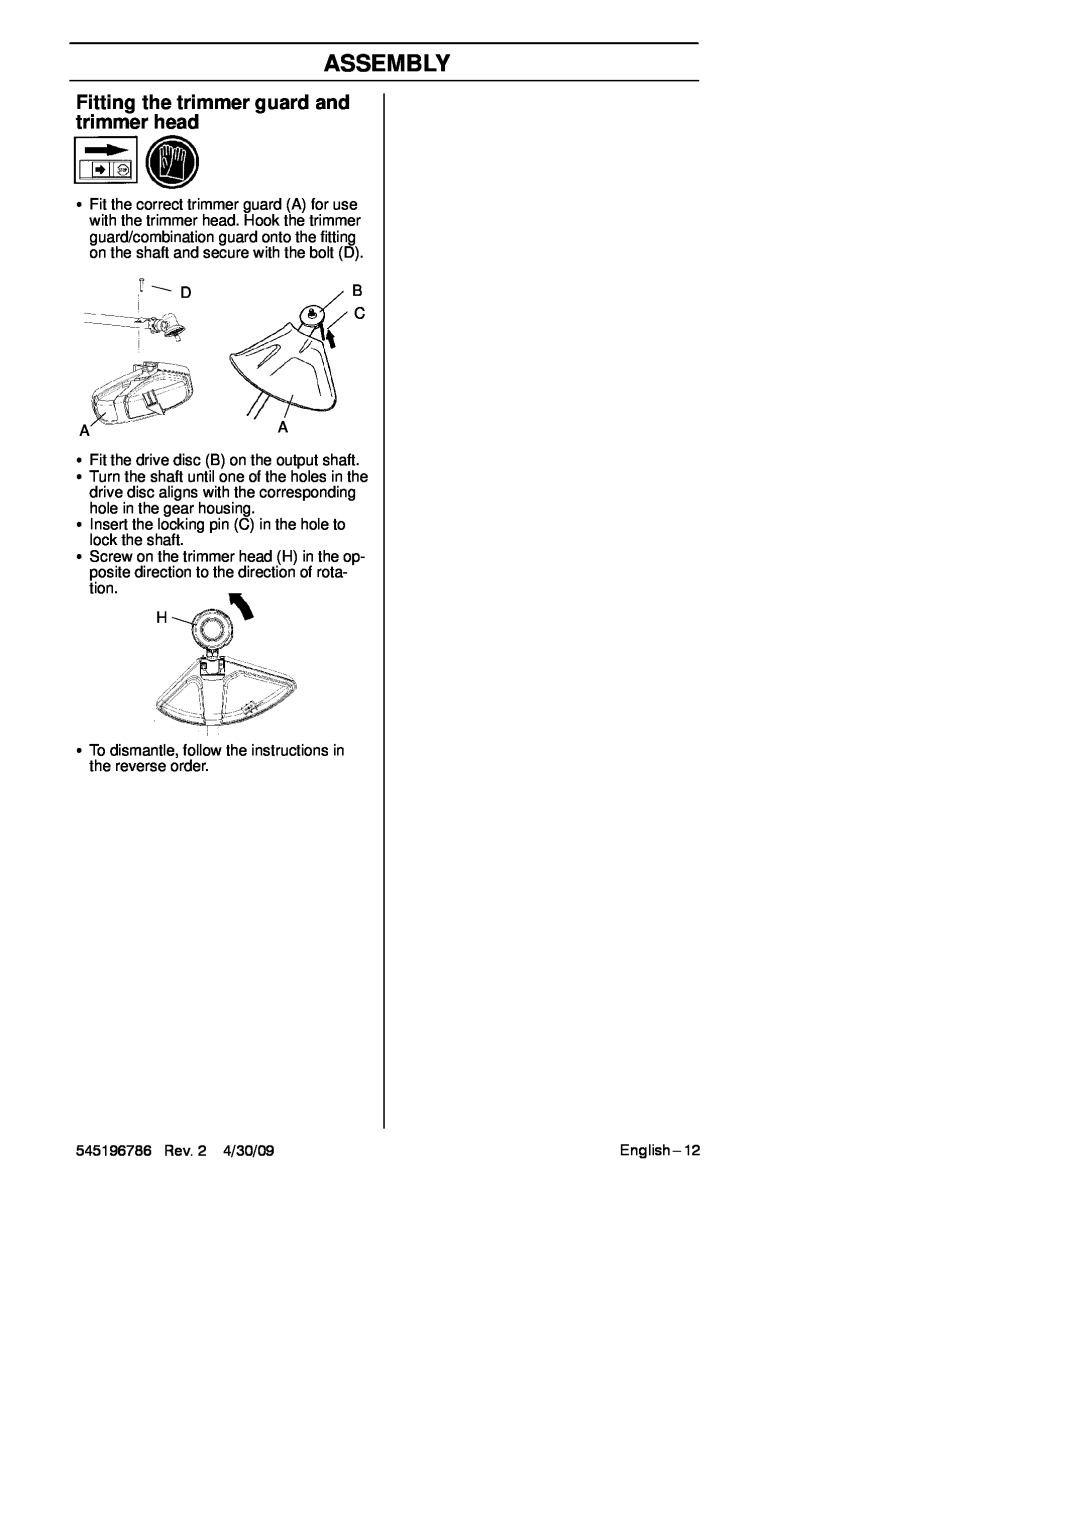 Husqvarna 128RJ manual Fitting the trimmer guard and trimmer head, Assembly 